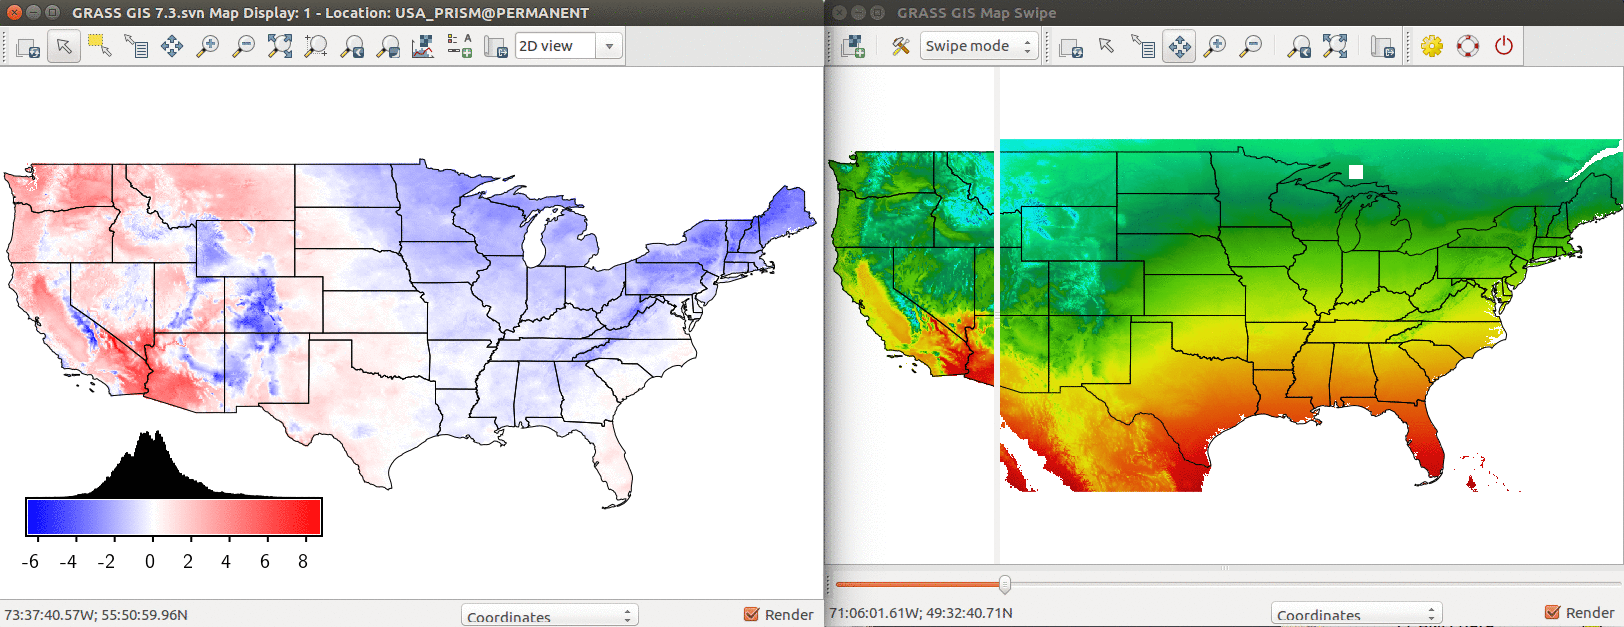 Comparison of PRISM annual mean temperature and modeled temperature based on latitude and elevation. Left: Difference between modeled and real temperature in degree Celsius. Right: Using Map Swipe to visually assess the model (modeled temperature on the right side).